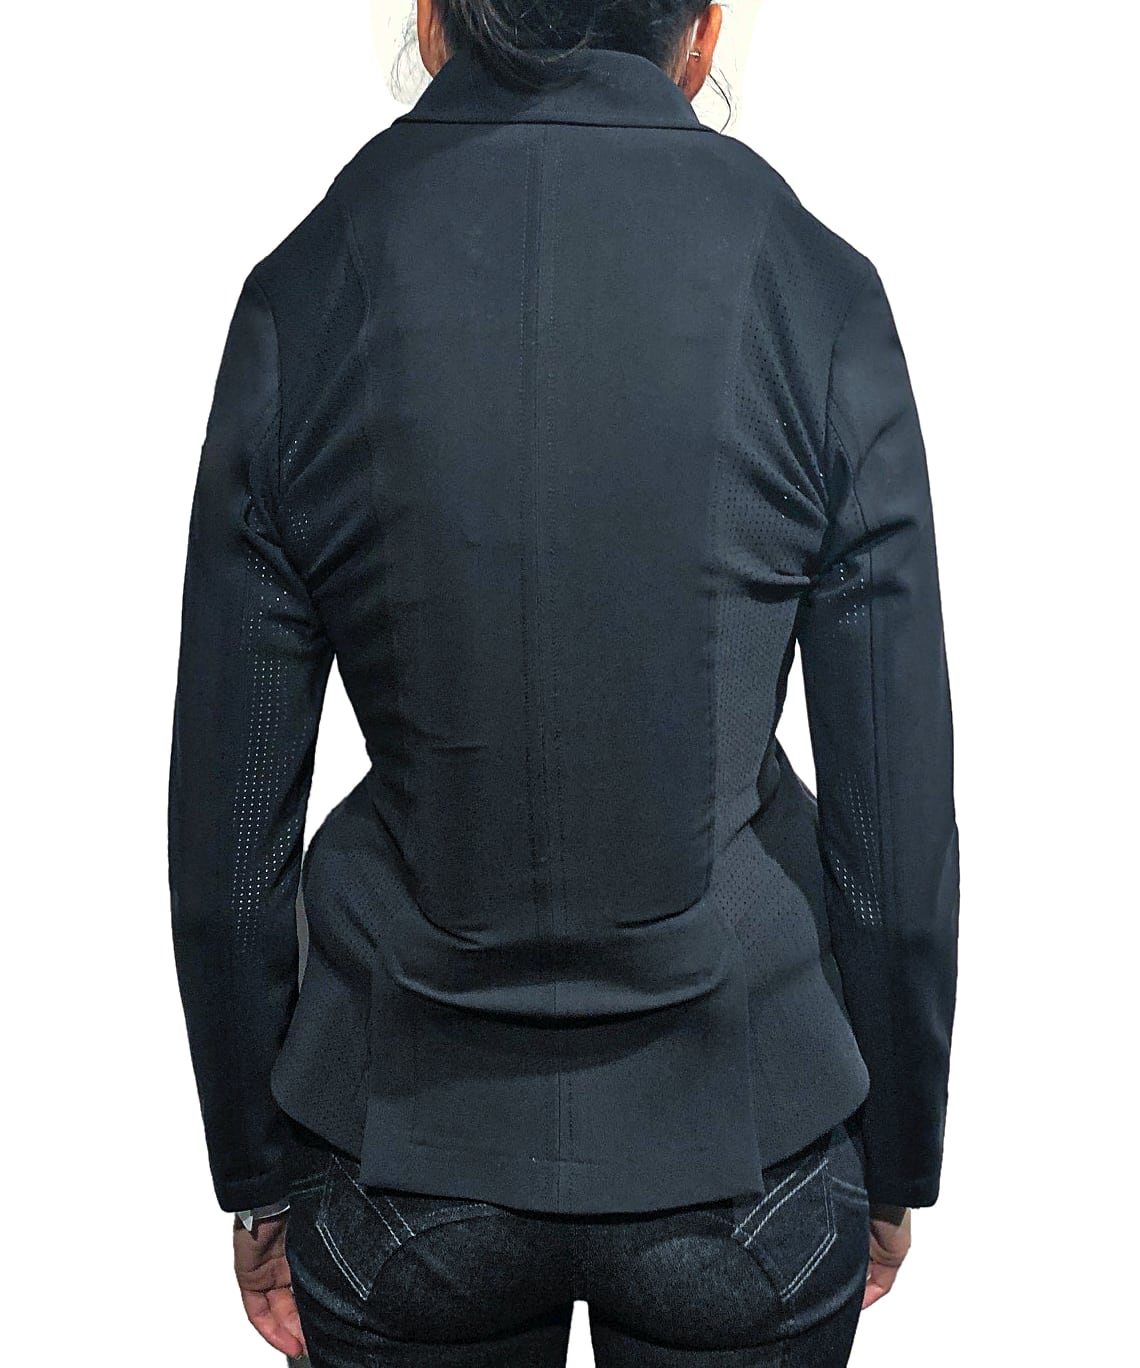 Equiline for Zip-In 2 Jacket Outer Rear Inflated